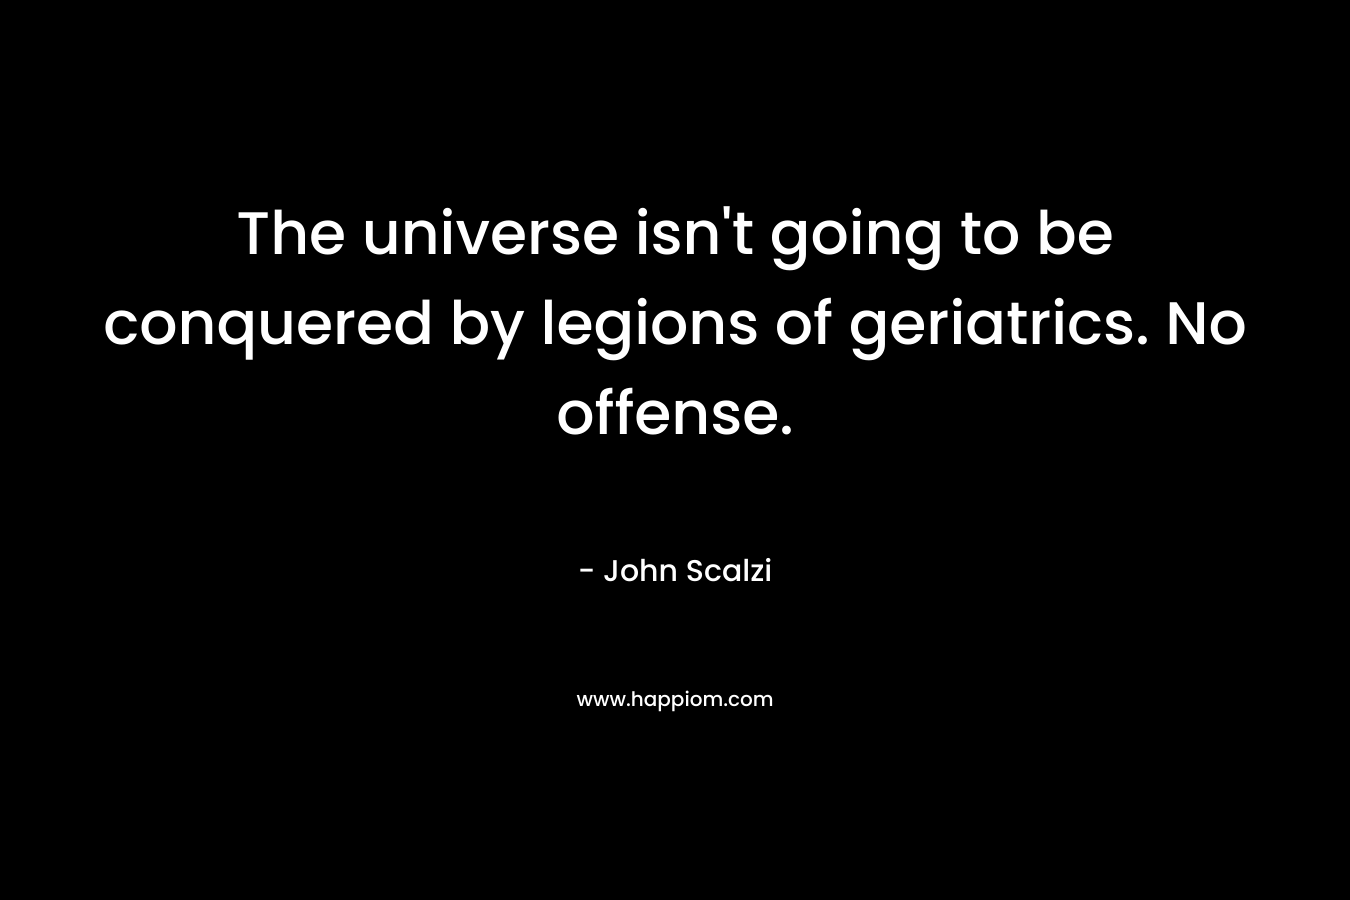 The universe isn't going to be conquered by legions of geriatrics. No offense.